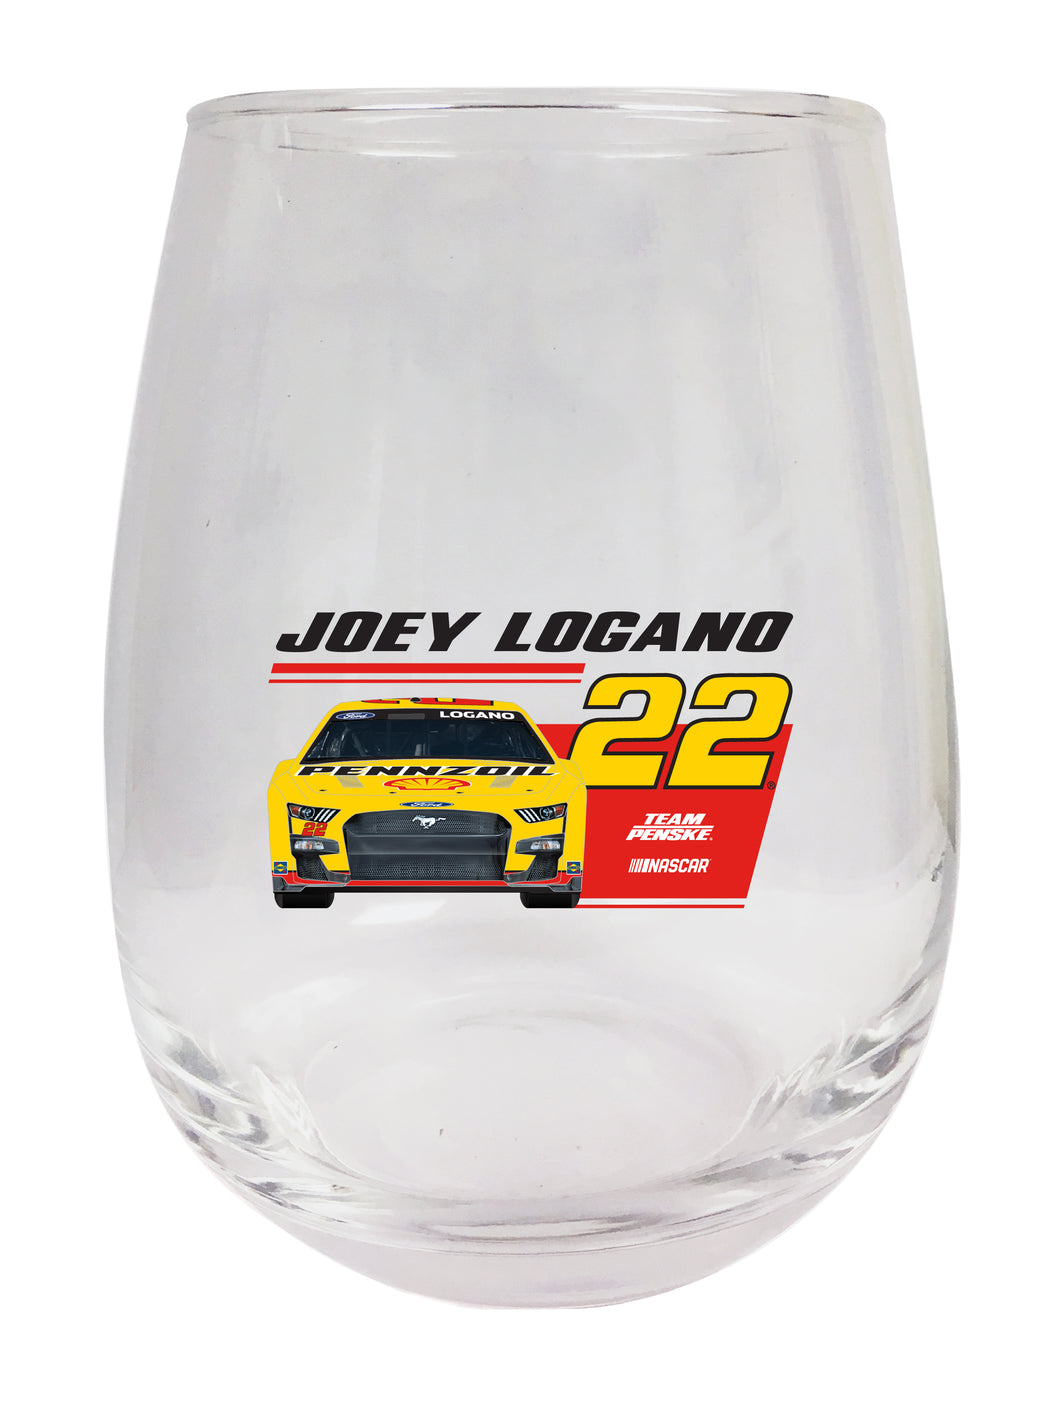 #22 Joey Logano NASCAR Officially Licensed Stemless Wine Glass